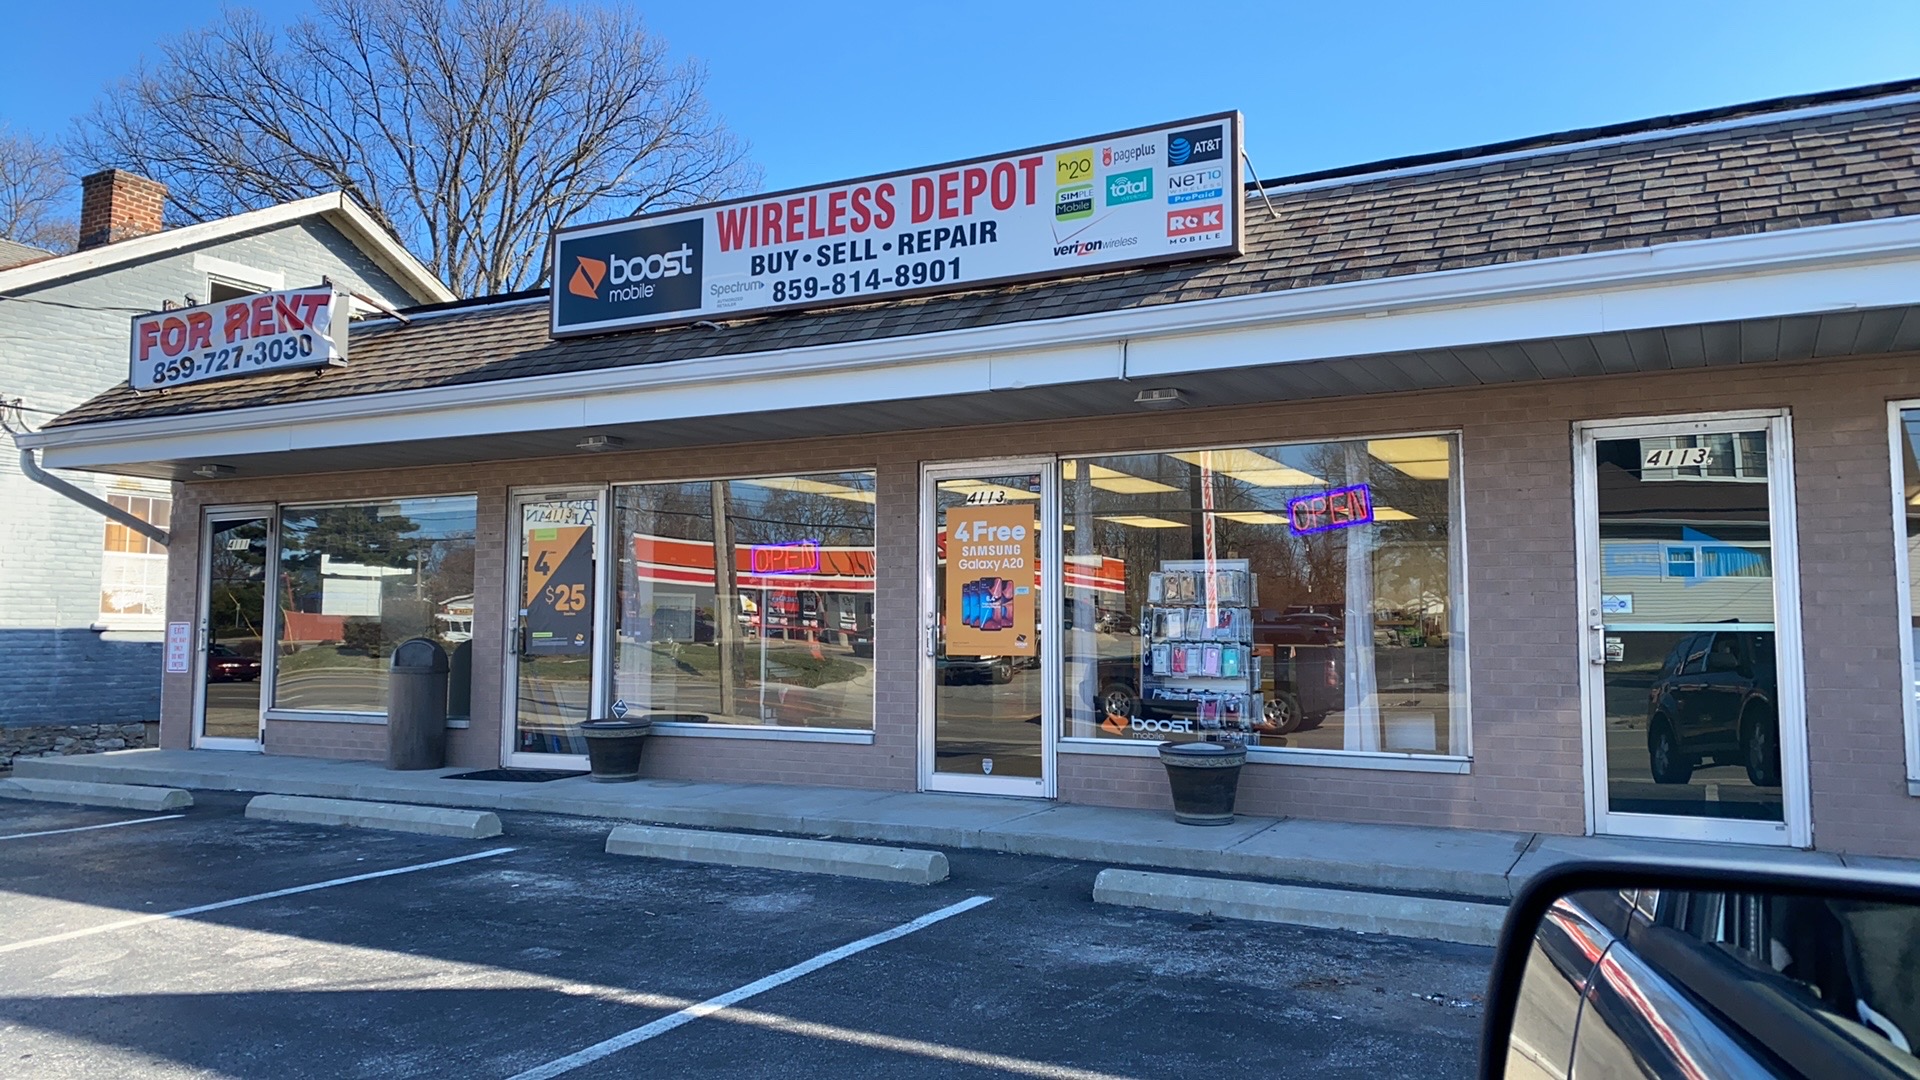 wireless Depot ( Boost Mobile Store)